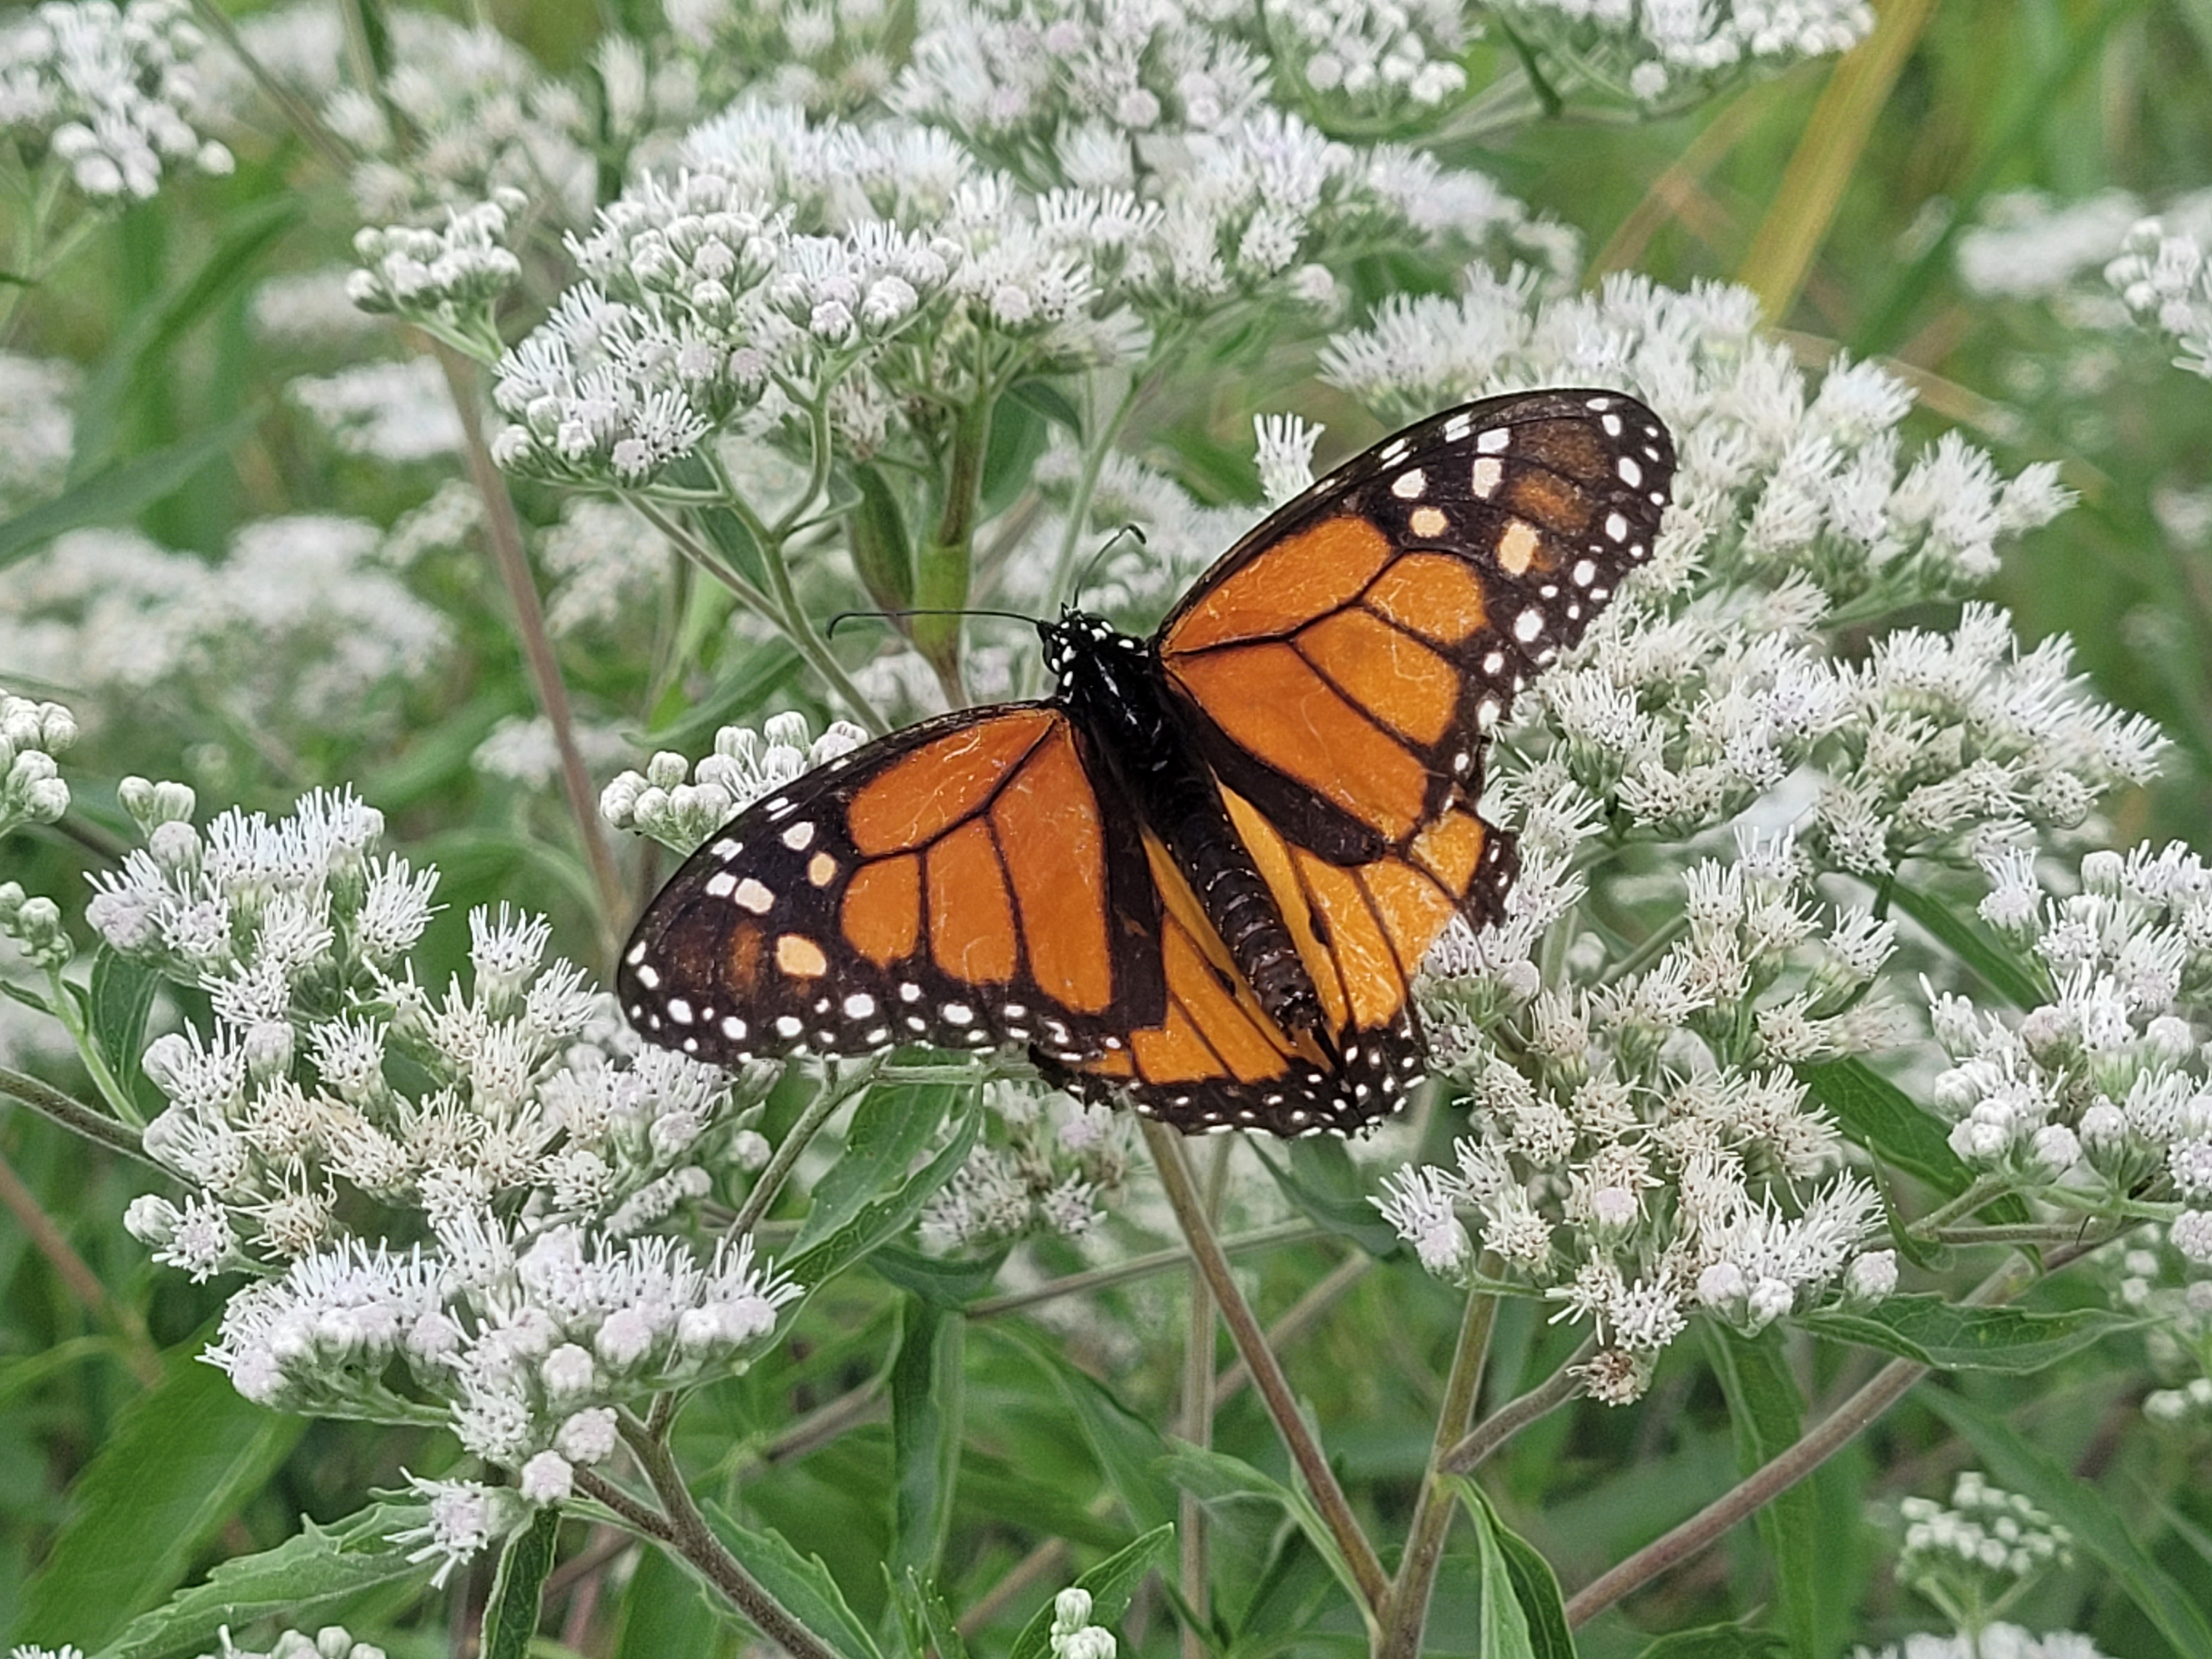 A monarch butterfly on small white flower clusters.